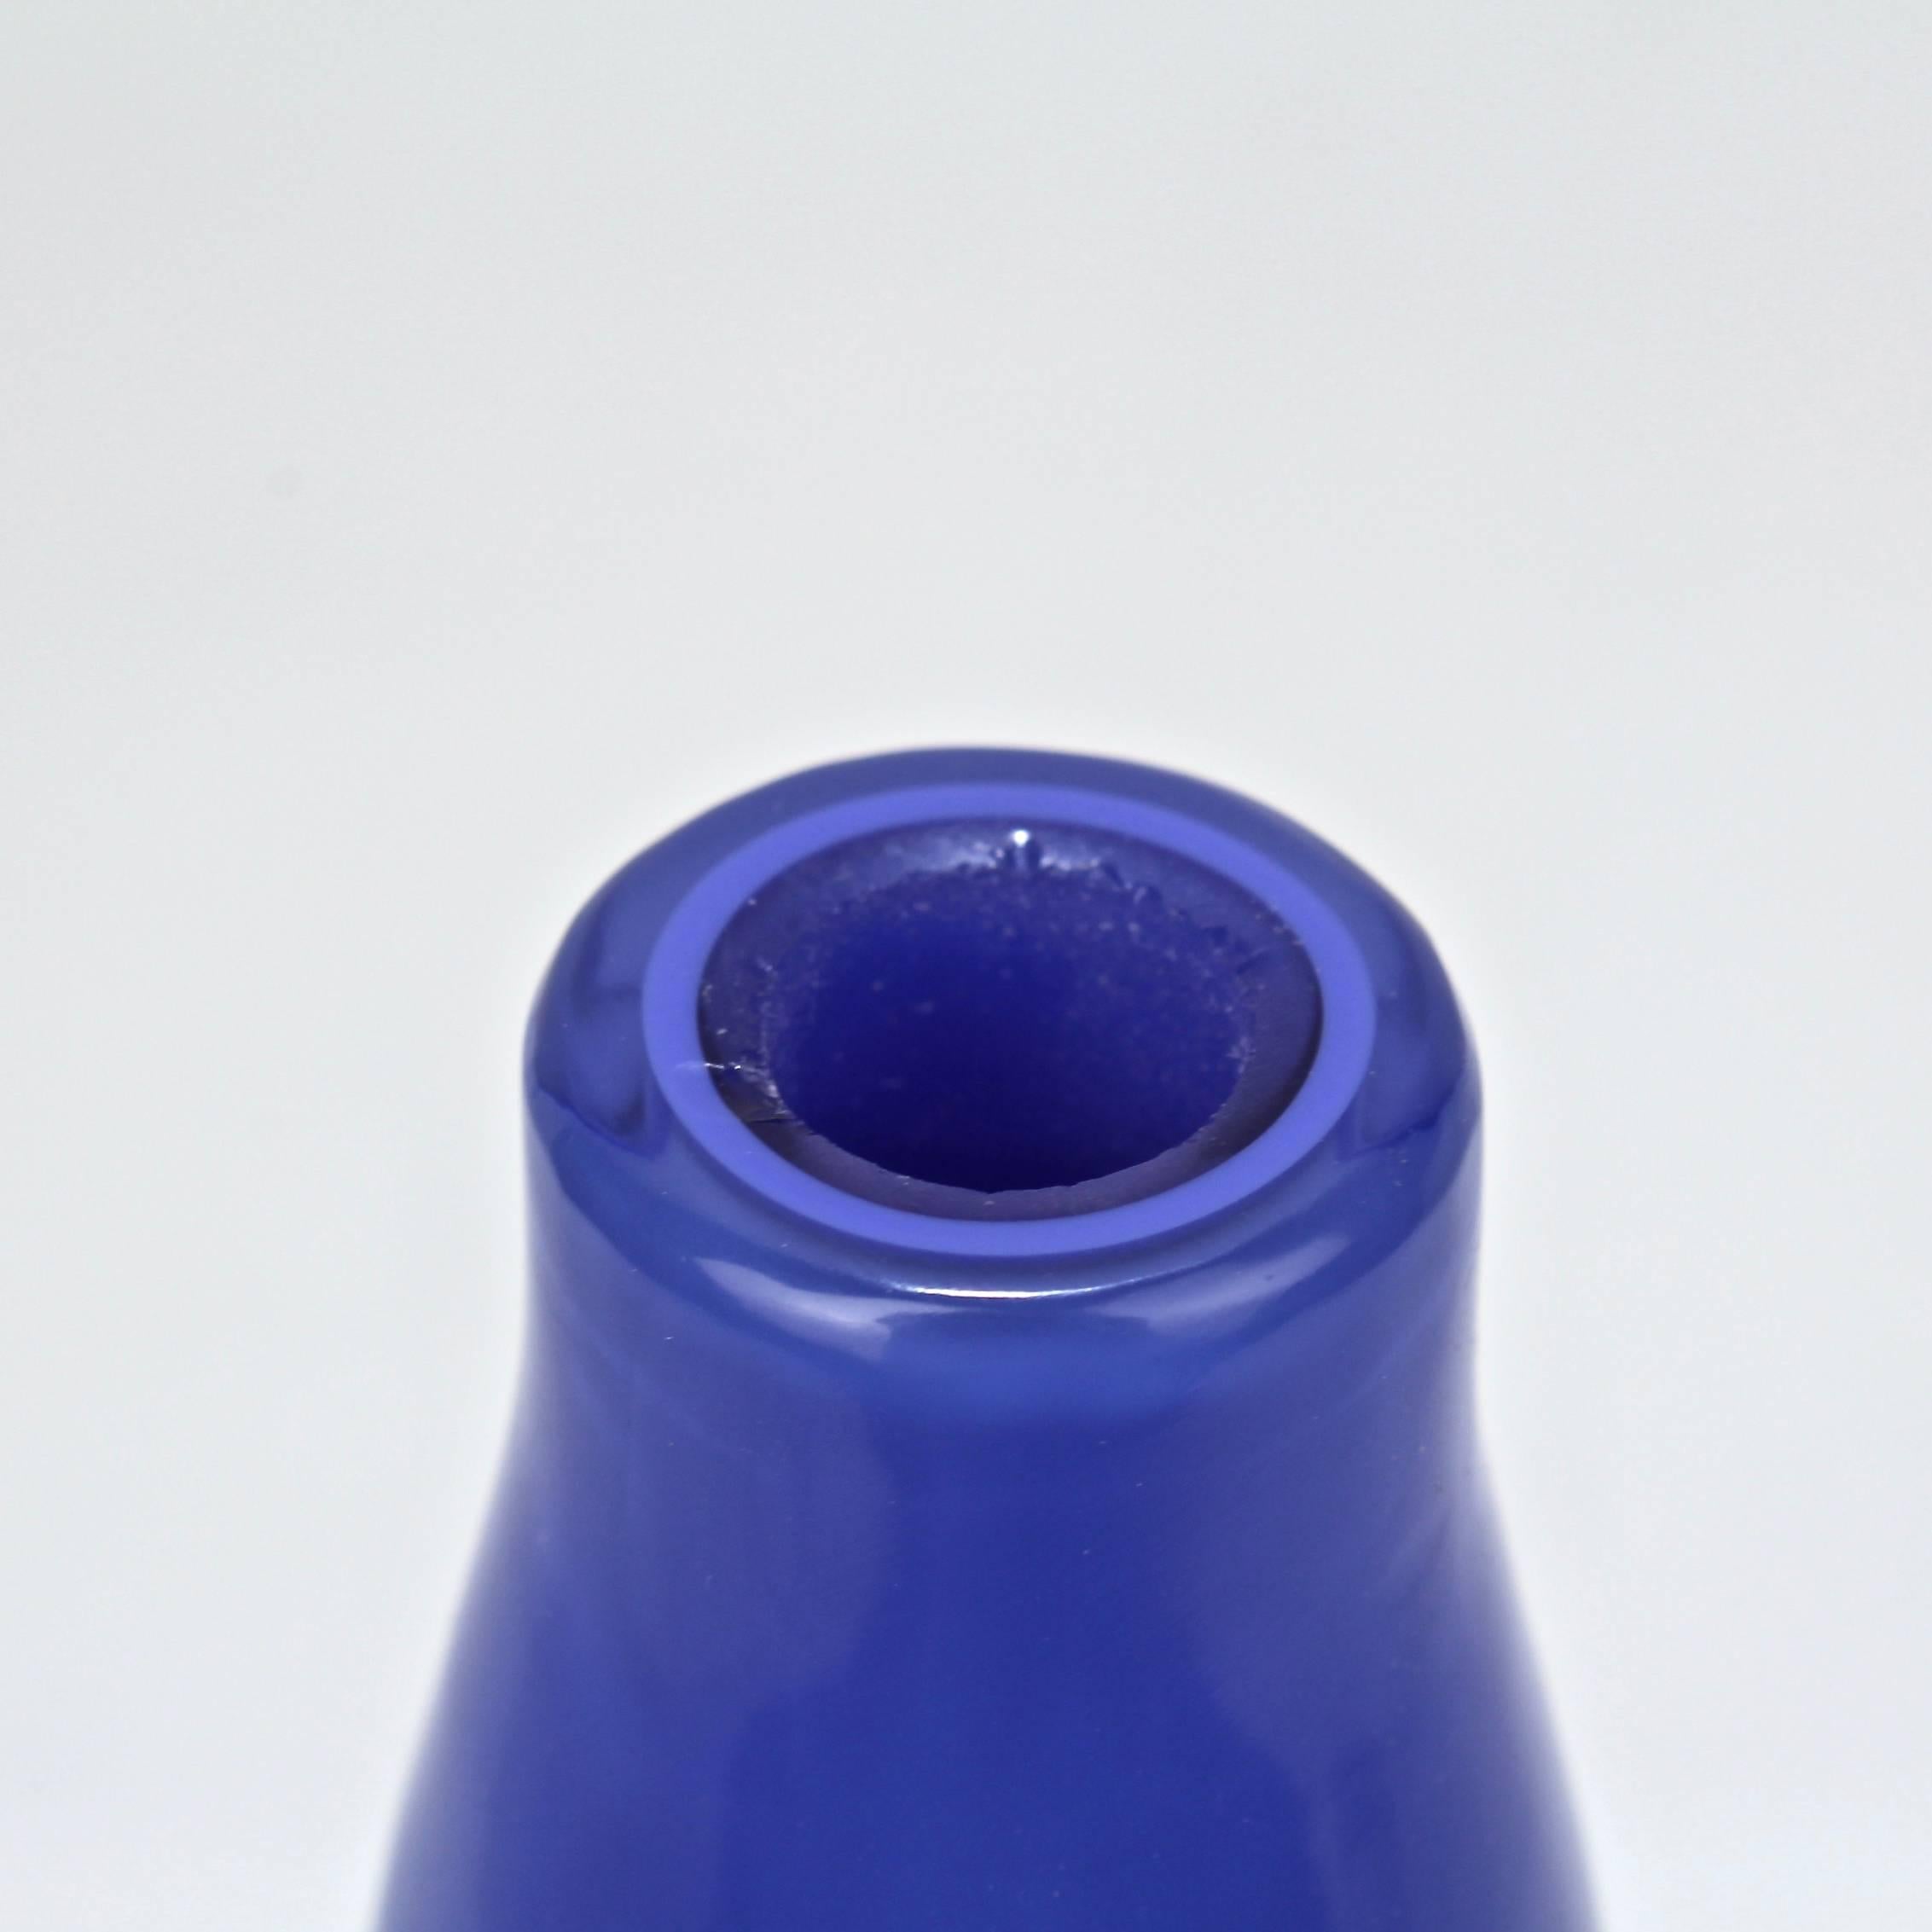 20th Century Blue Murano Glass Vase by Tagliapietra & Angelin for Effetre International, 1985 For Sale